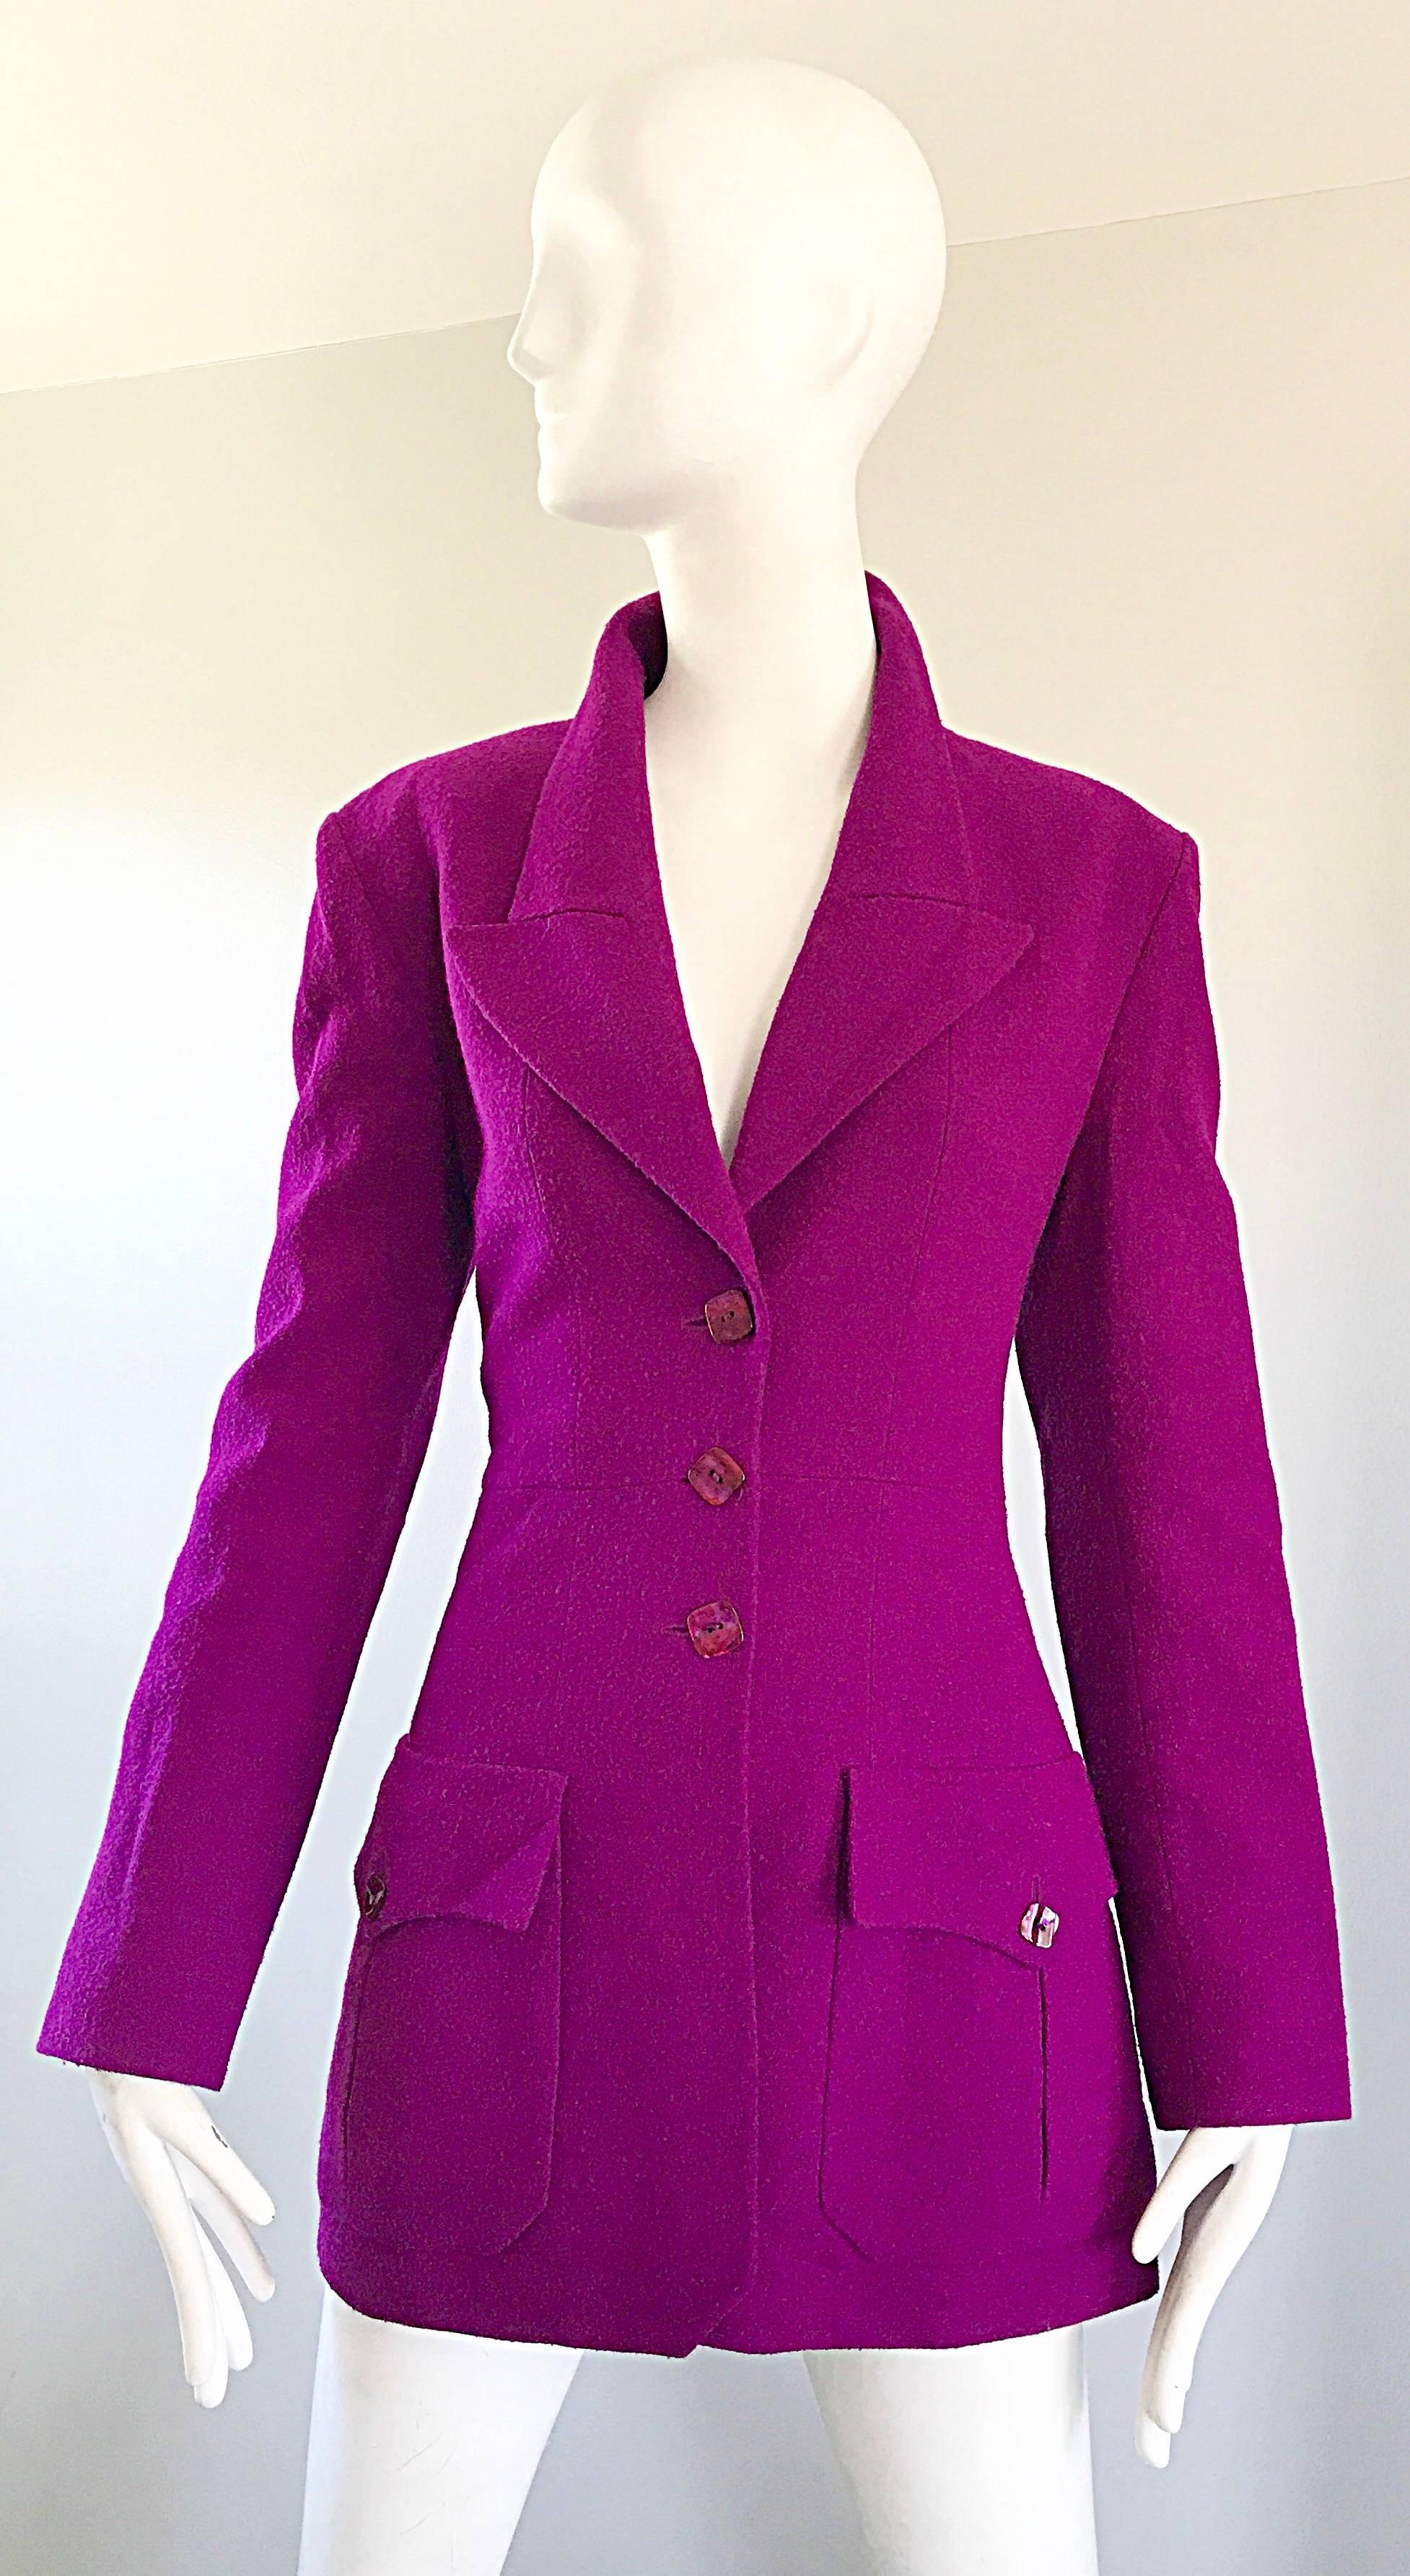 Chic 1990s CHLOE by KARL LAGERFELD magenta / hot pink fuchsia military inspired blazer jacket! Features an exaggerated collar and lapels. Three square buttons up the bodice, and at each side waist pocket. Back center flattering asymmetrical vent.
